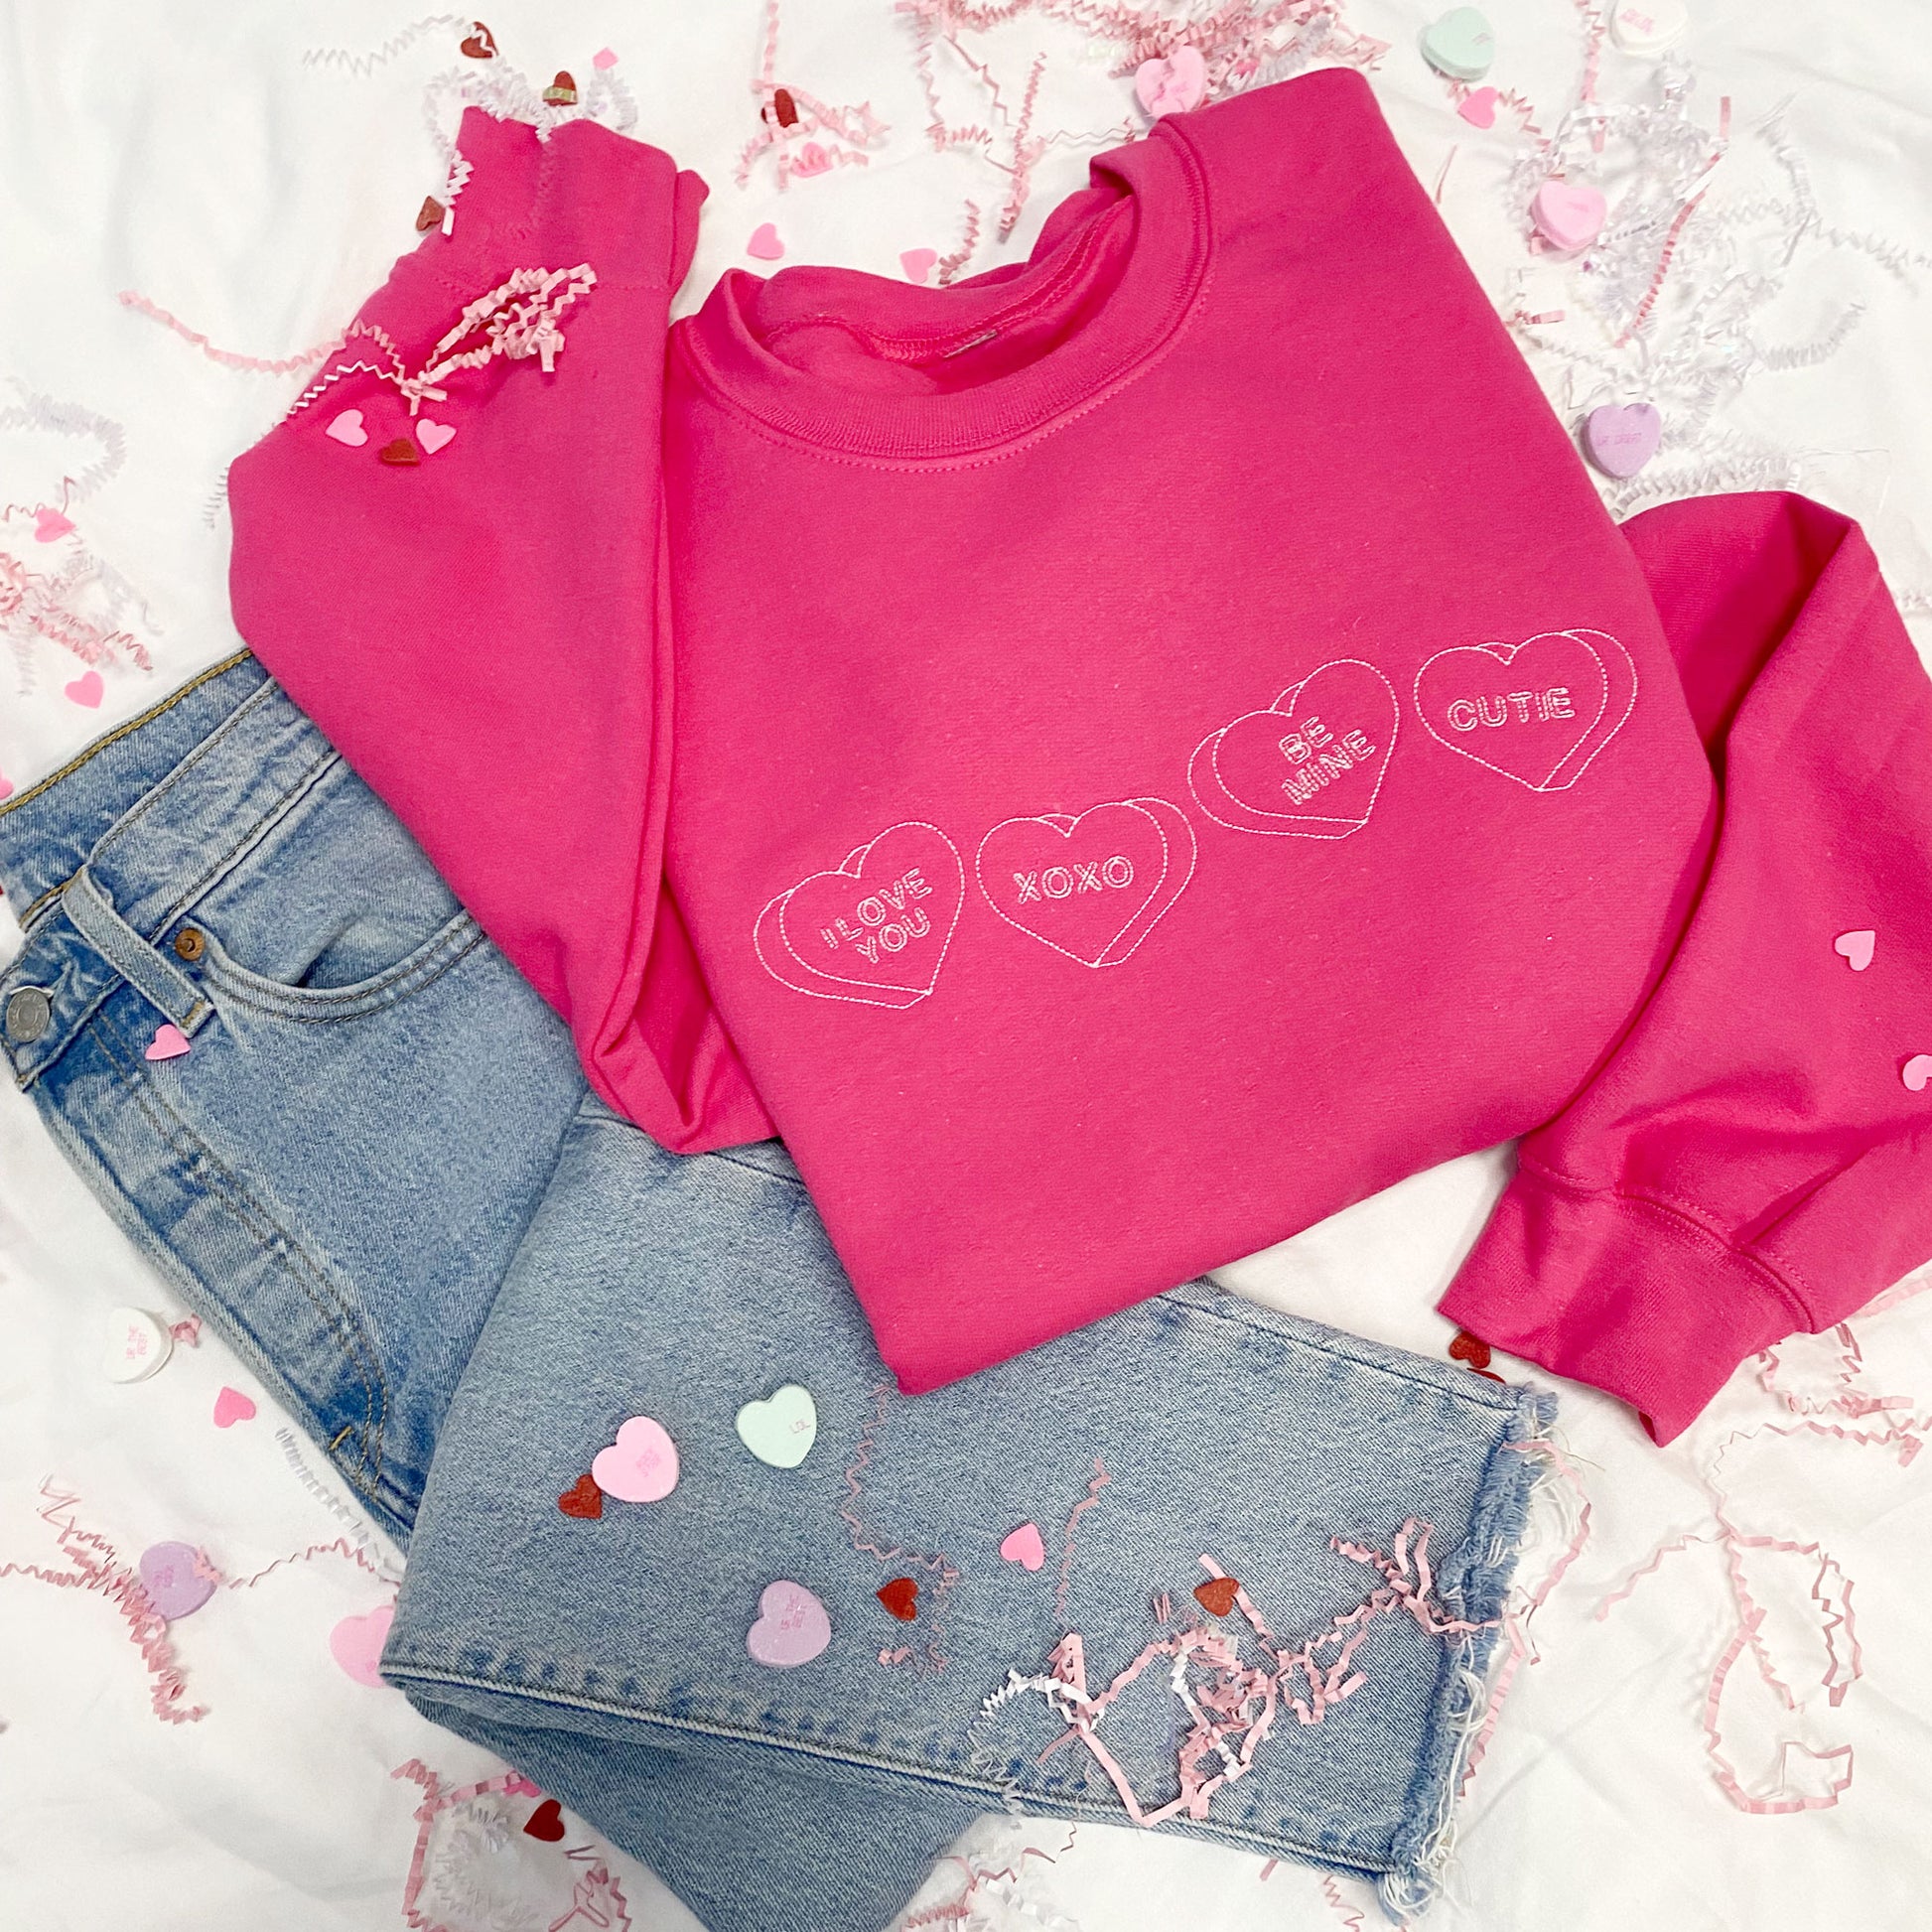 heliconia crewneck sweatshirt with candy heart embroidery designs saying "I love you," "xoxo," "be mine," and "cutie" across the chest.